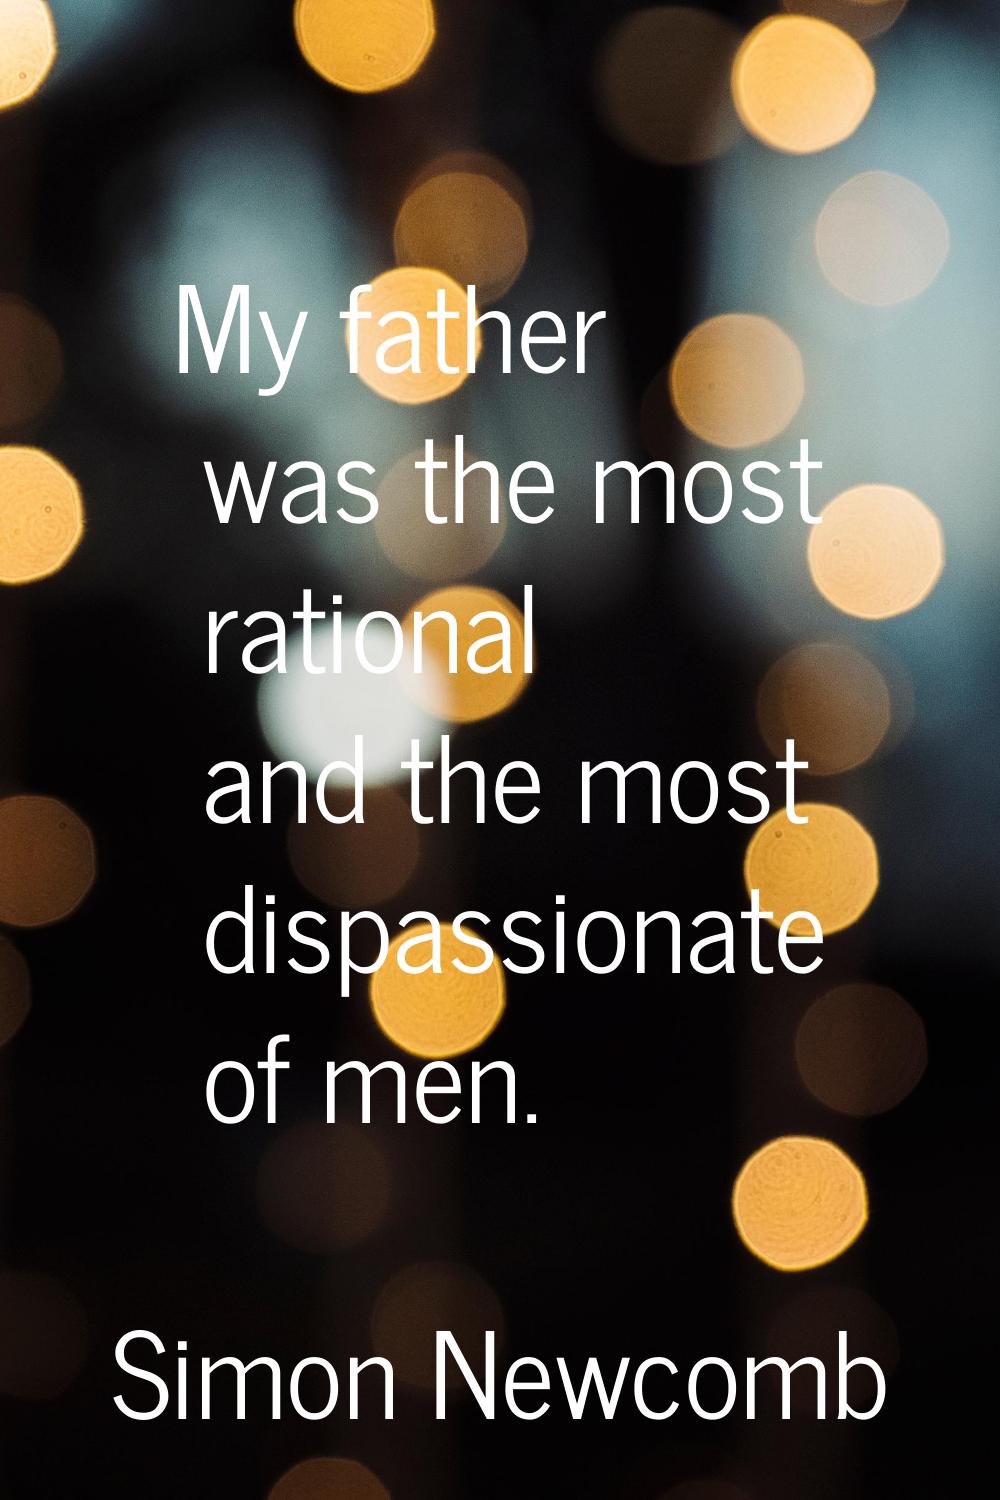 My father was the most rational and the most dispassionate of men.